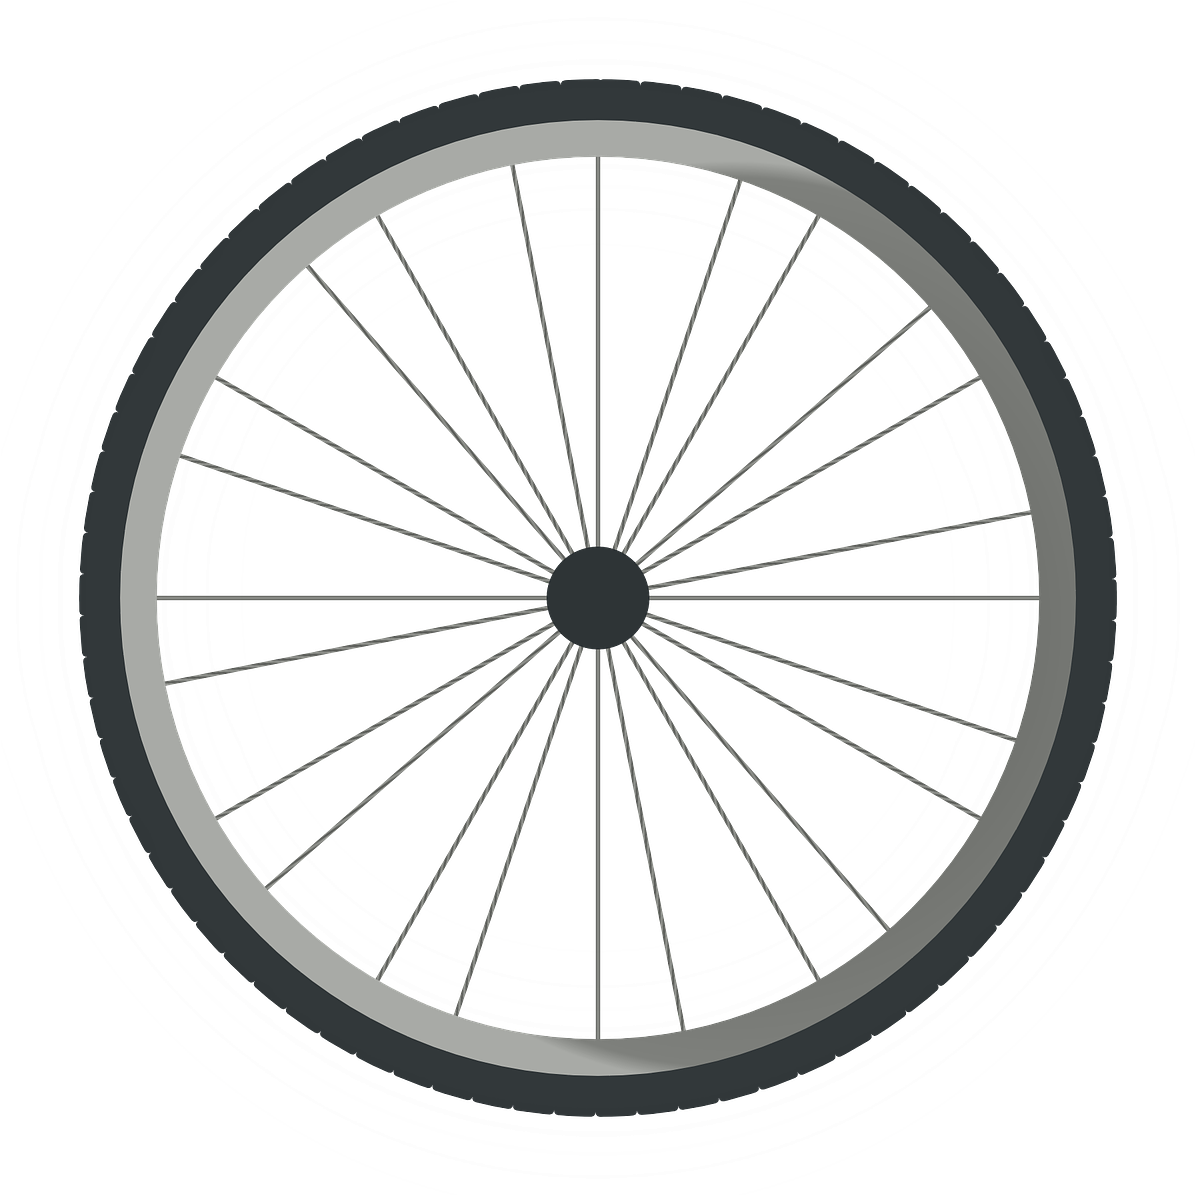 A Bicycle Wheel With Spokes